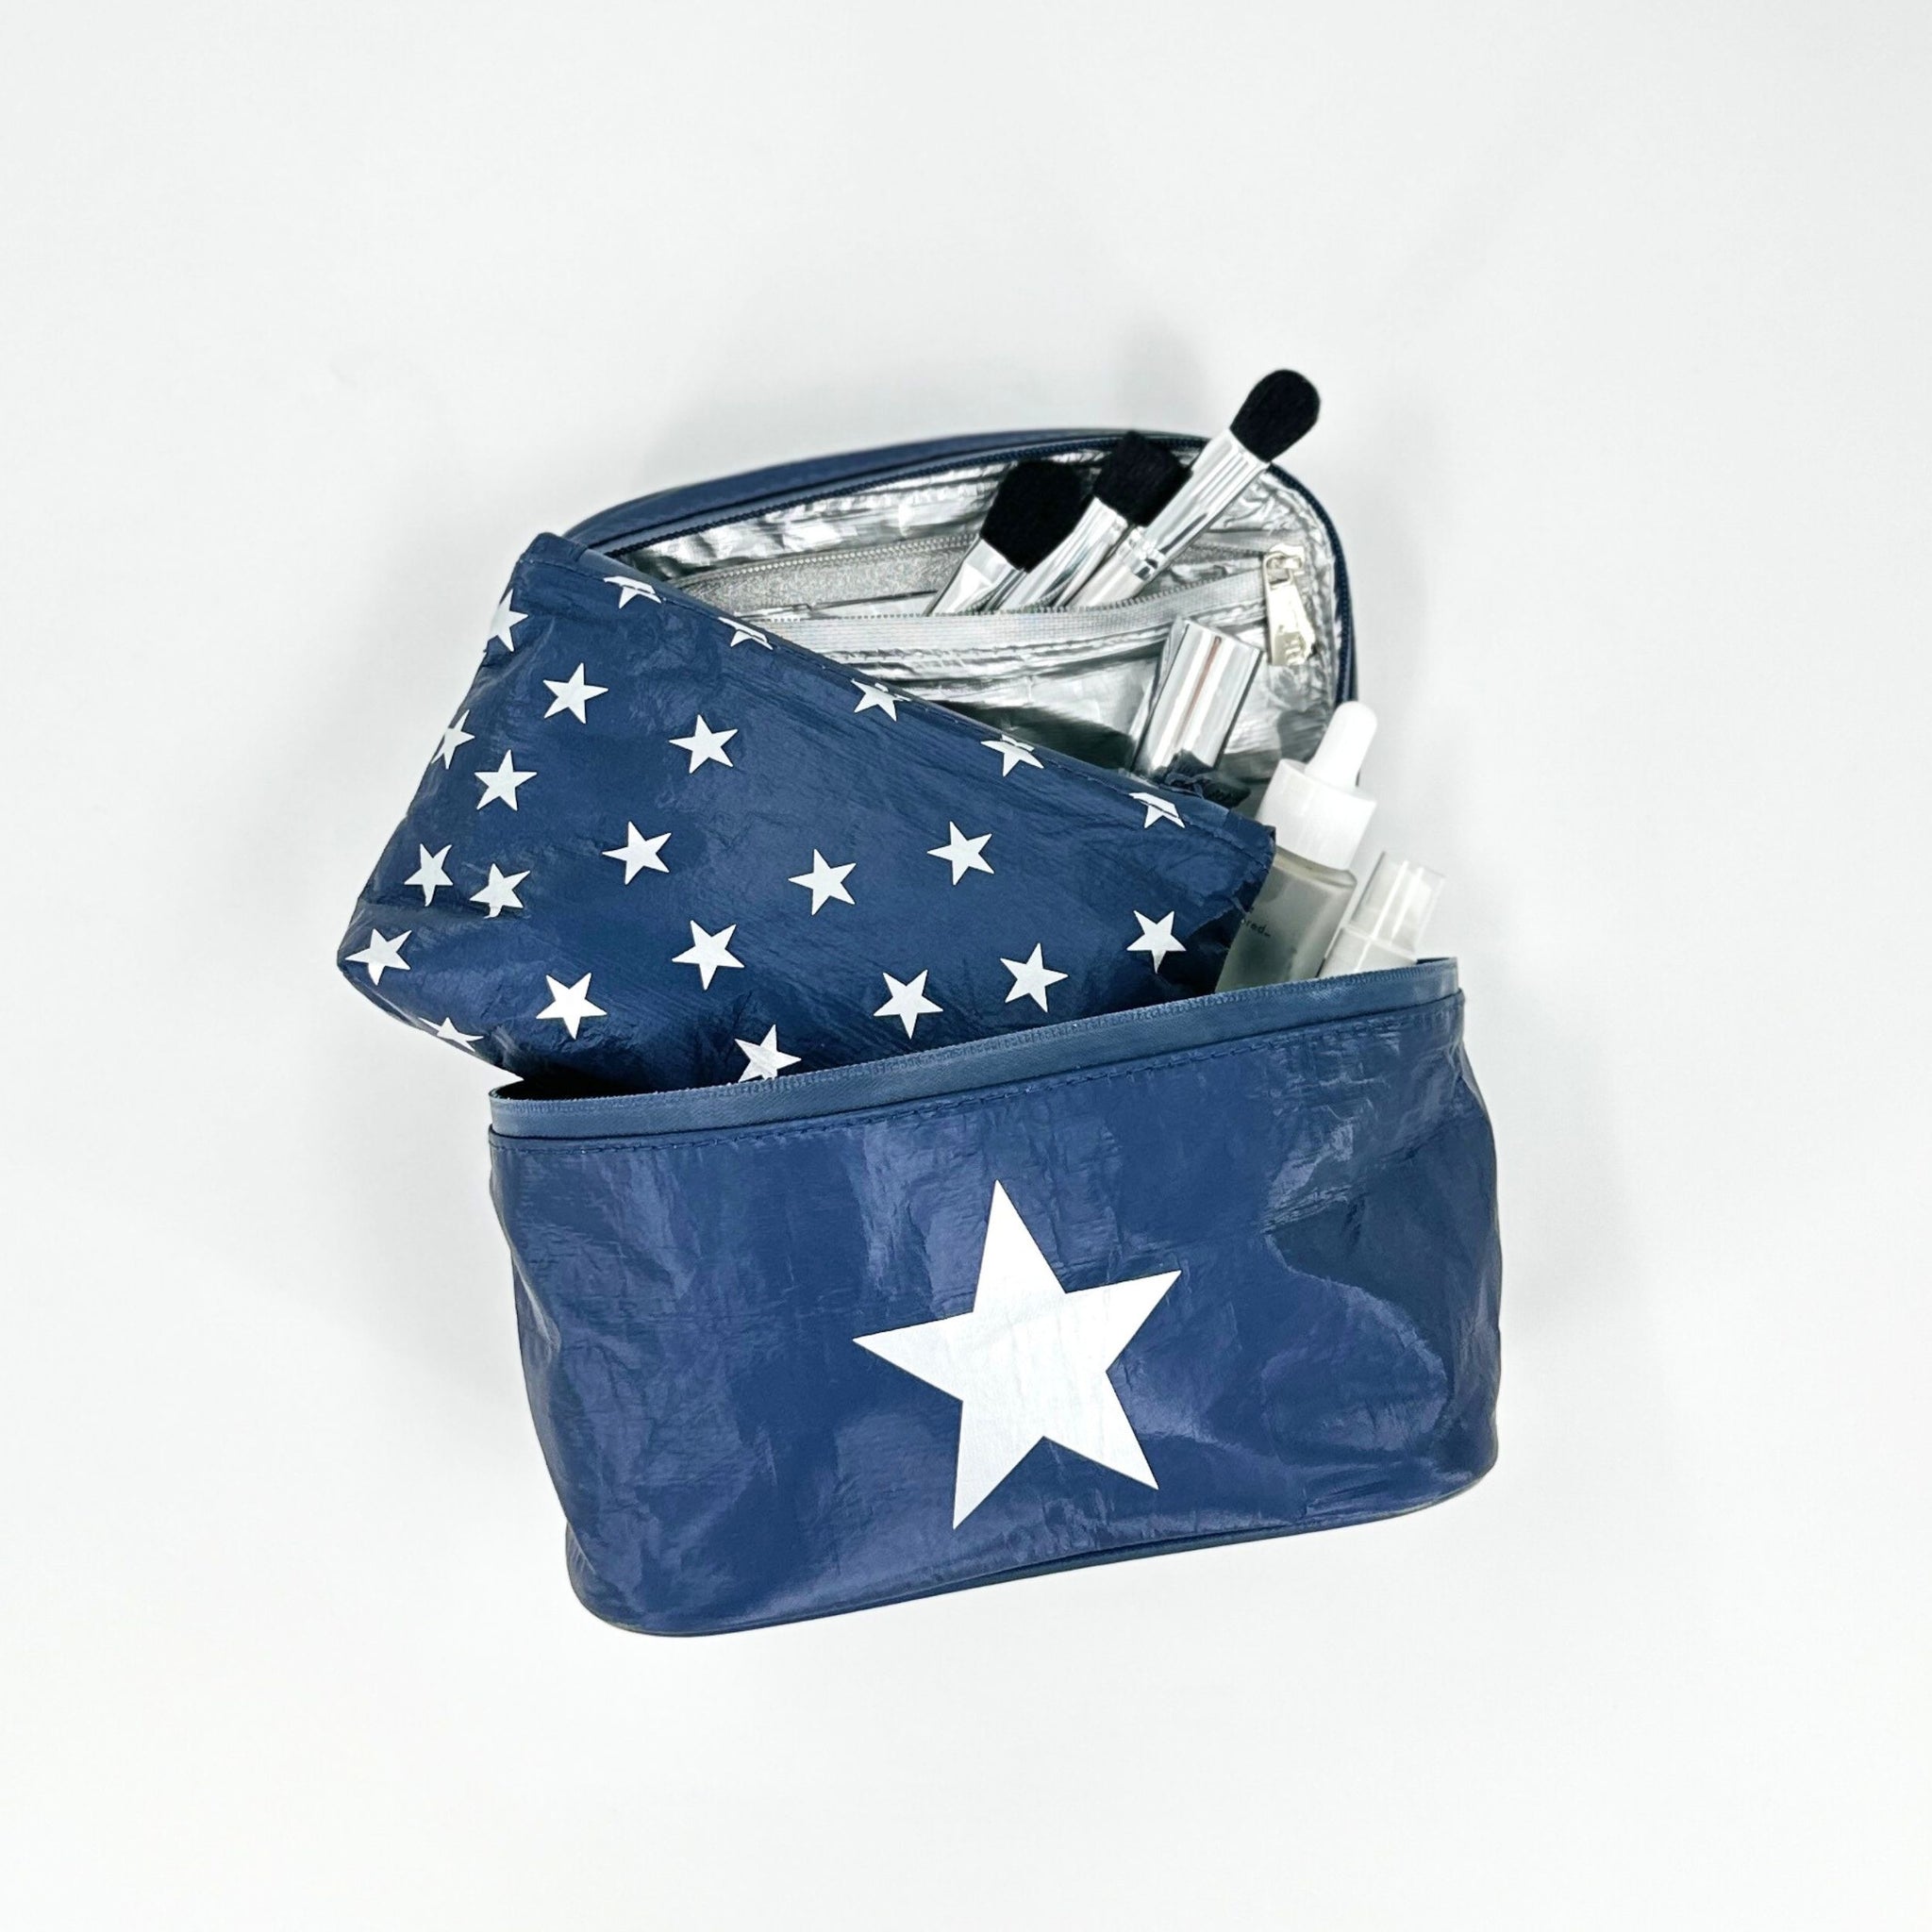 Cosmetic Case or Lunch Box in Shimmer Navy with Silver Star